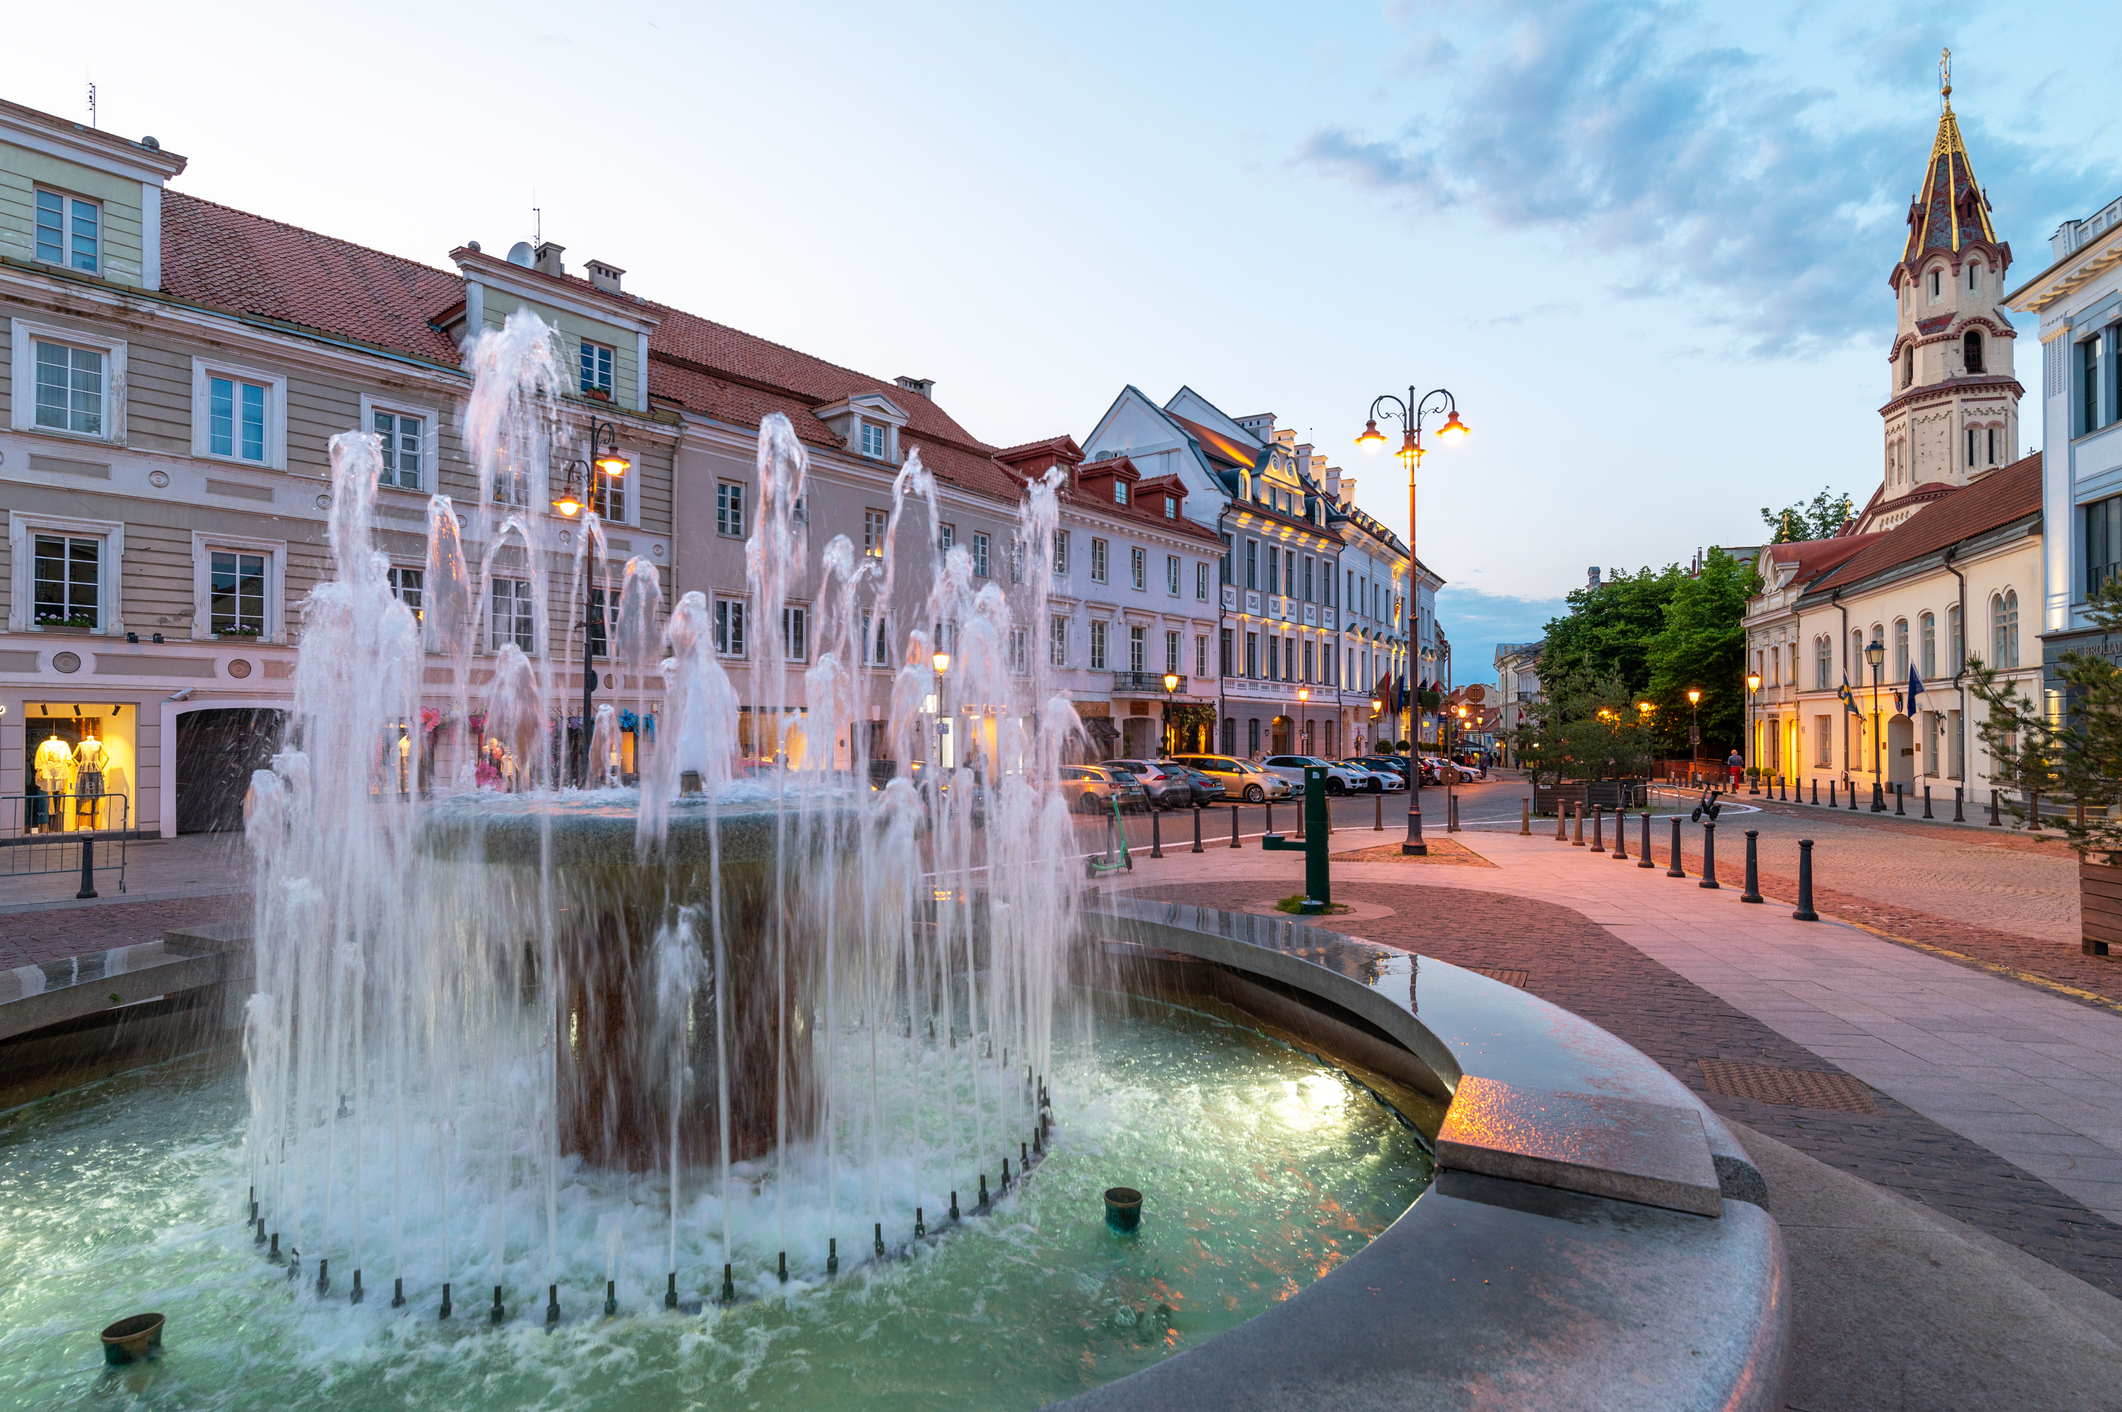 Fountain in a city square during twilight with surrounding buildings and a tower in the background